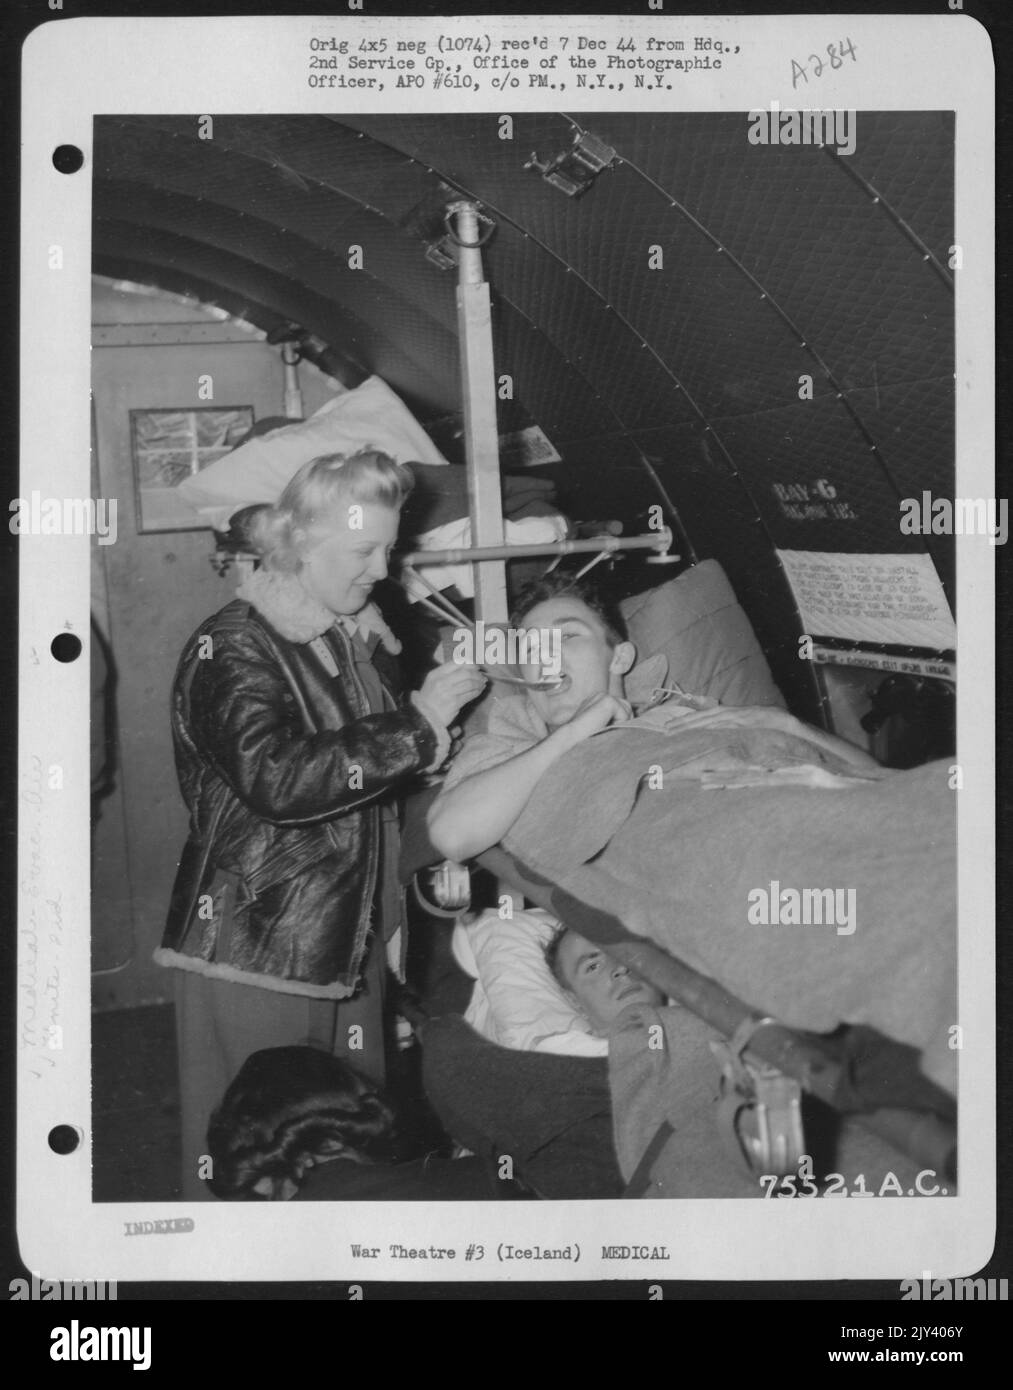 An Air Force Nurse Feed A Patient Aboard A Transport Plane At An Air Base Somewhere In Iceland. 2Nd Service Group, 4 October, 1944. Stock Photo